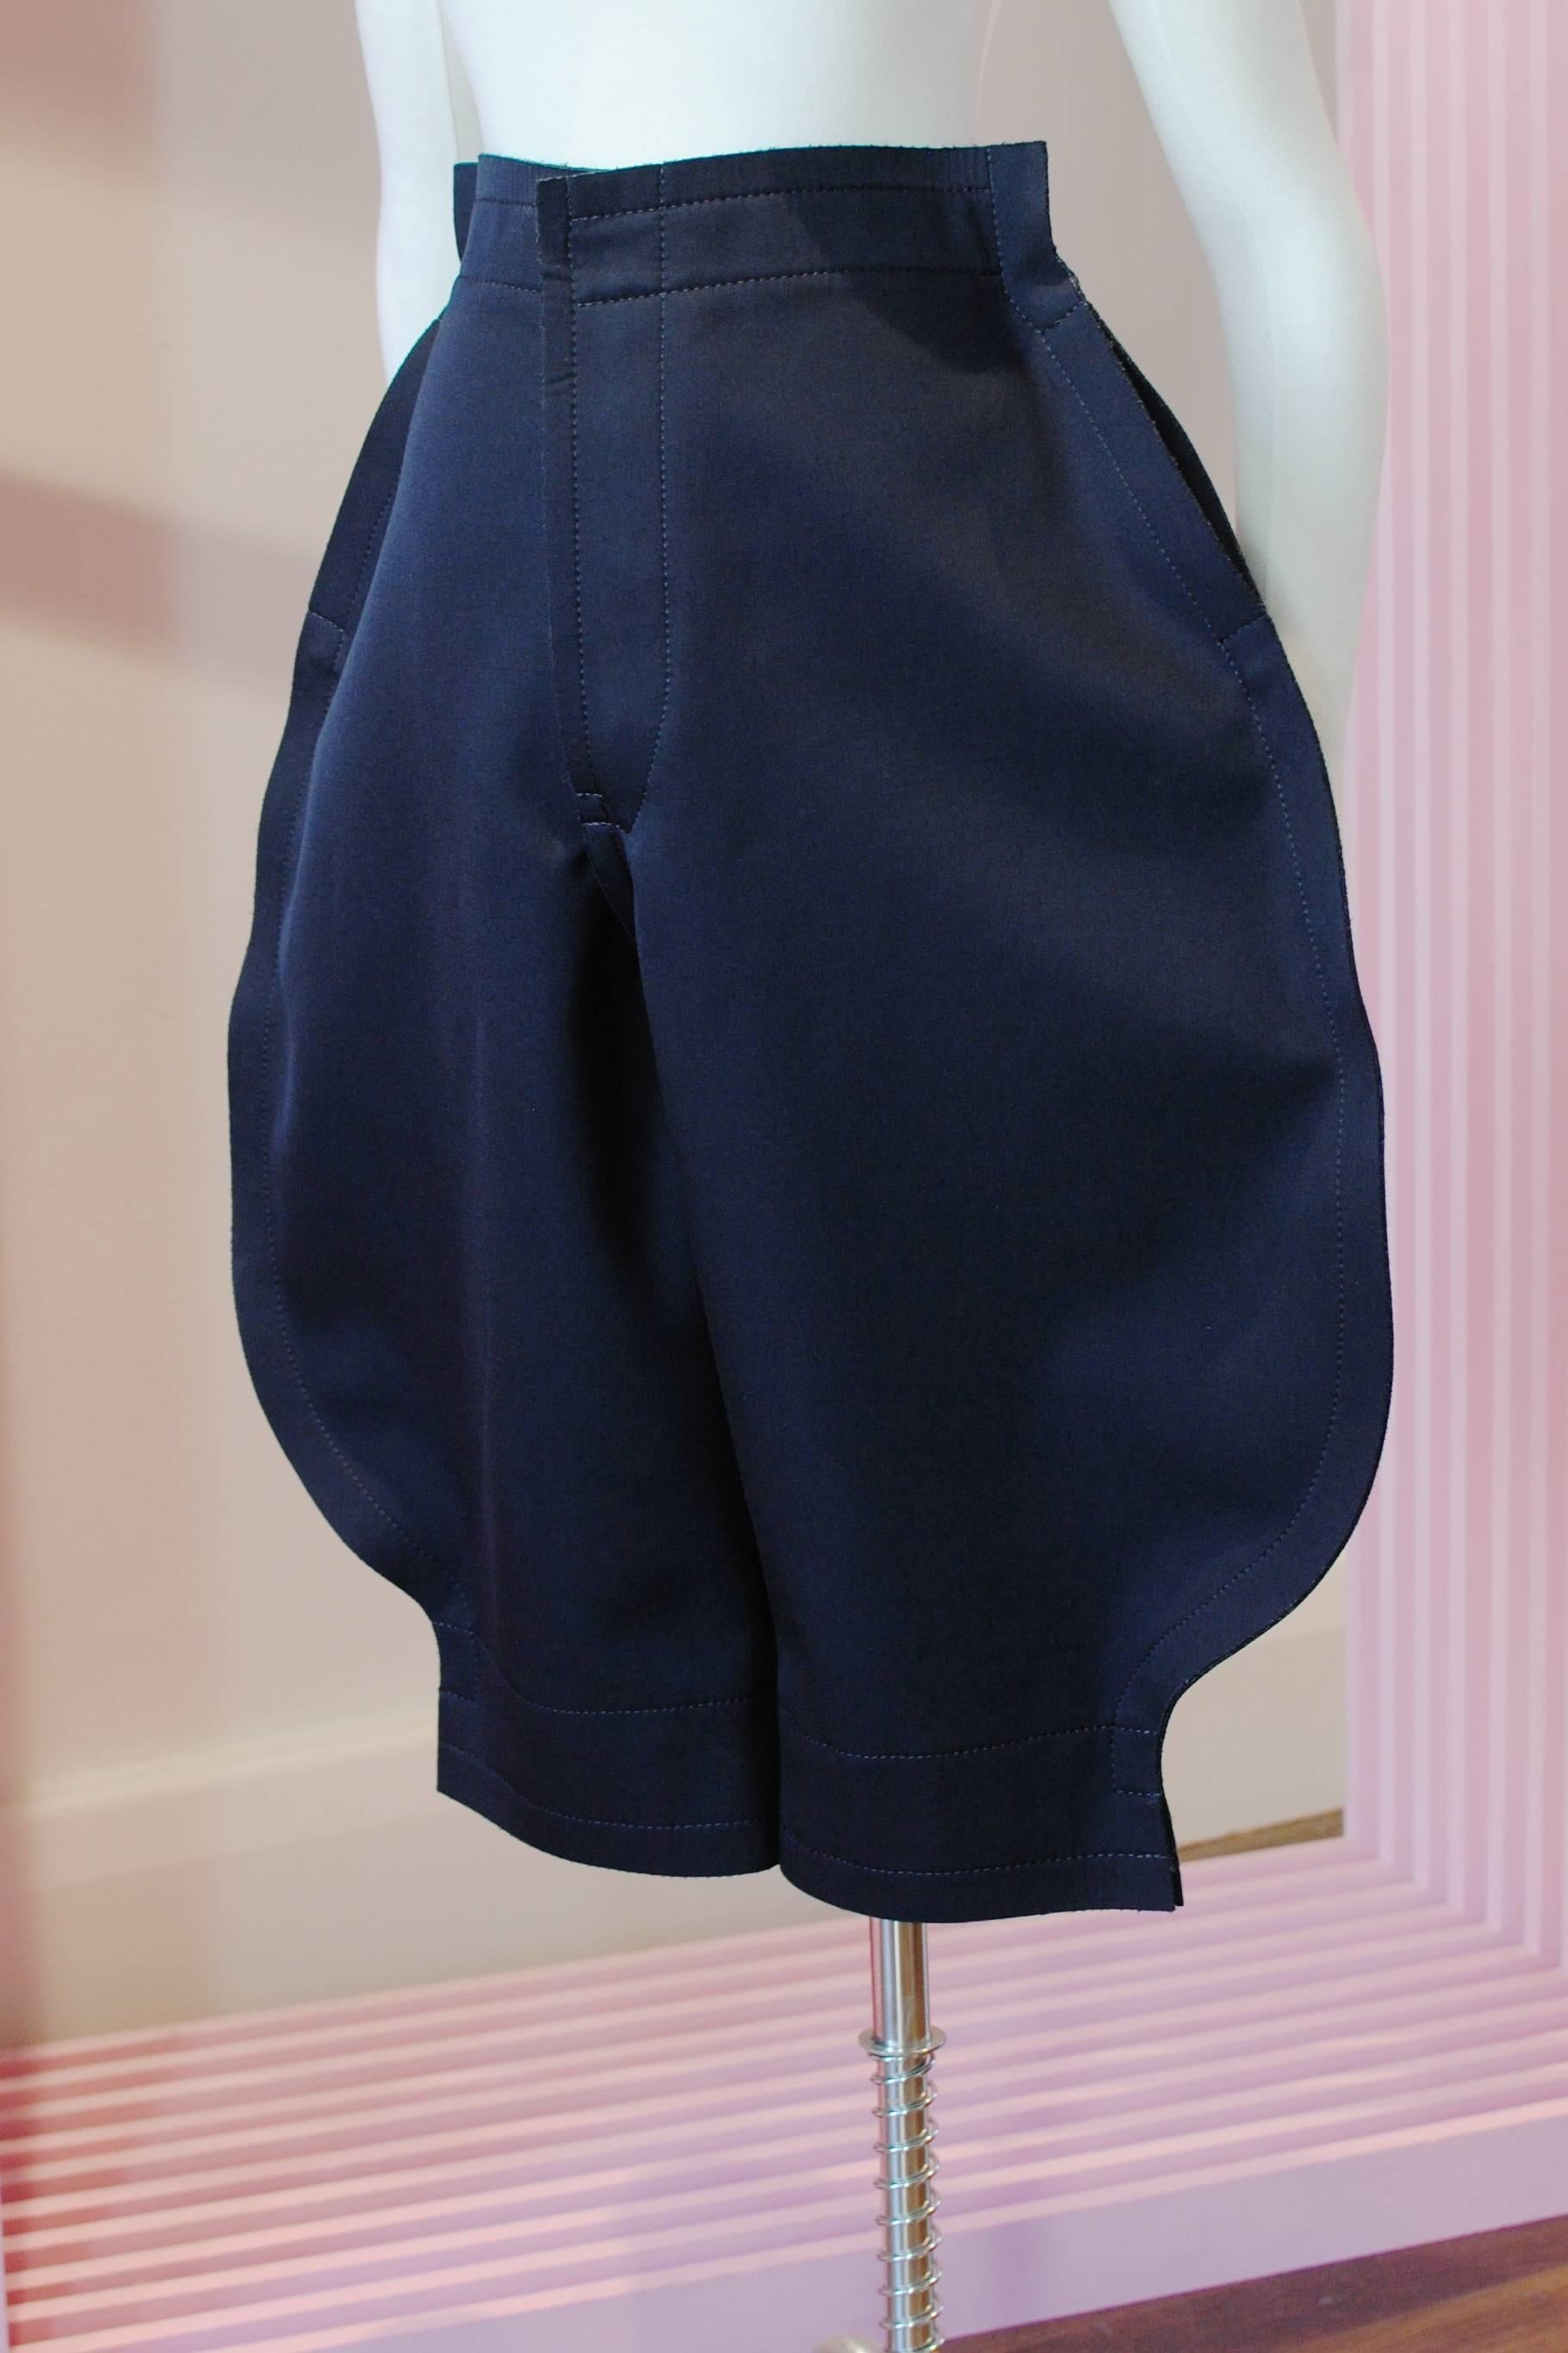 COMME des GARÇONS navy 2D breeches from the 2012 Autumn/Winter collection. They feature a 2D design, two waist level pockets and a thick two layered fabric with a wool gabardine outer and a polyester backing that gives the fabric its